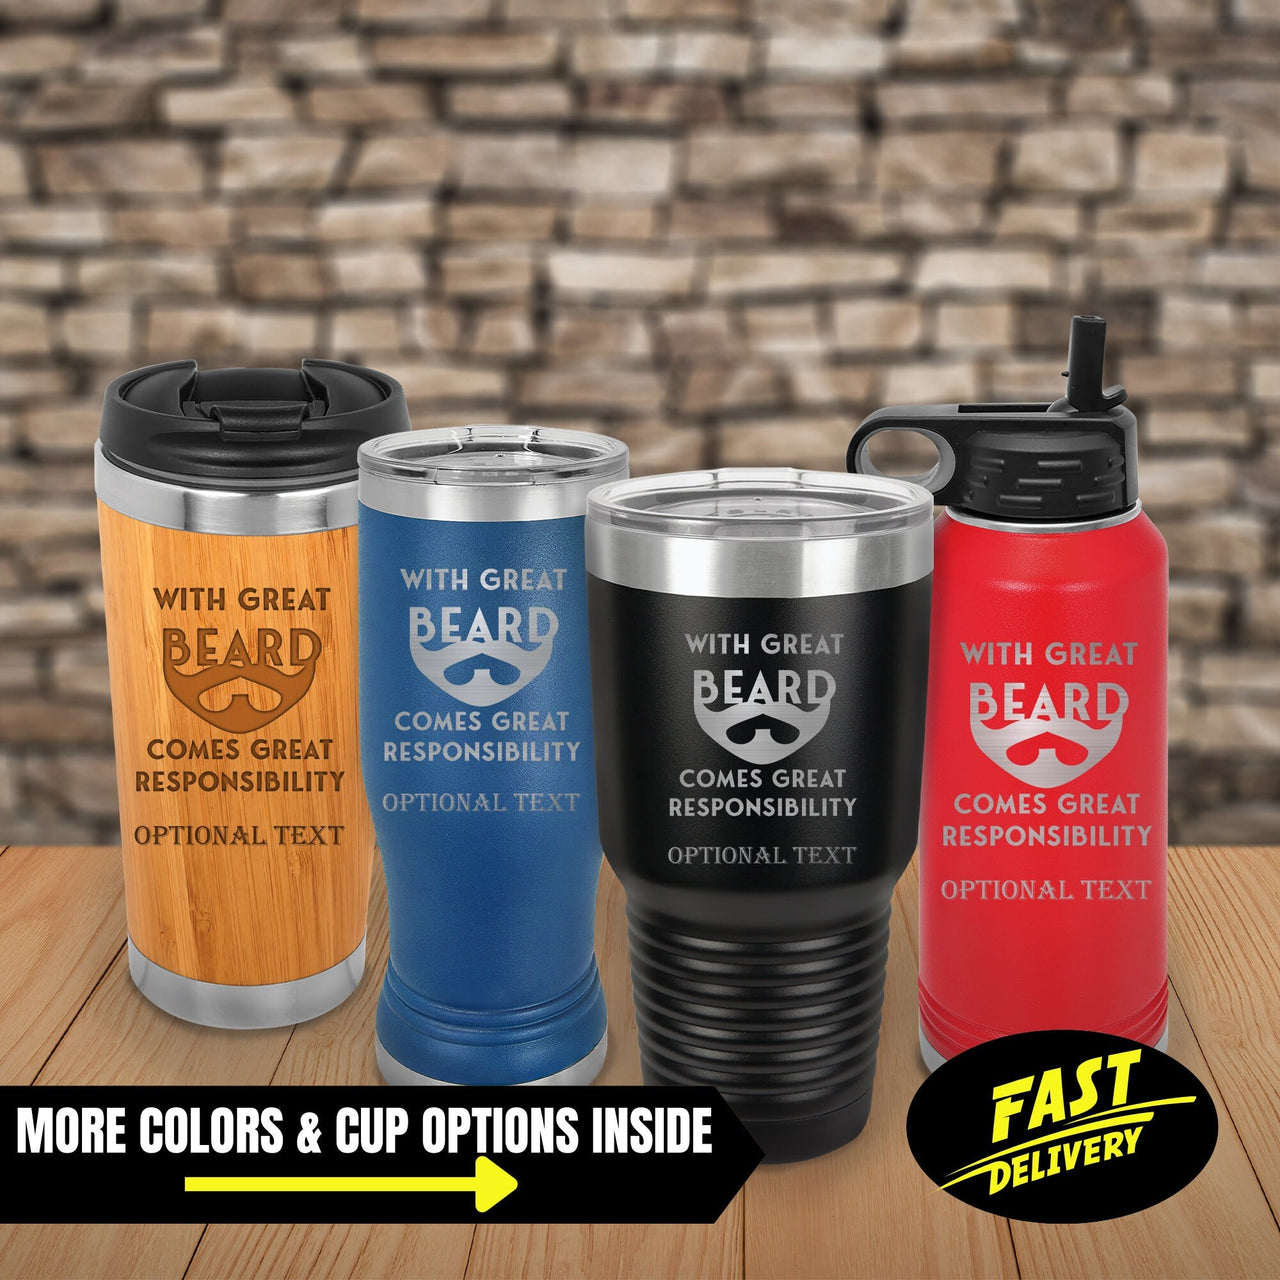 Funny Tumbler Gift, Personalized Name/Text - With Great Beard Comes with Great Responsibility Tumbler, Men Tumbler Gift, Travel Mug, Tumbler